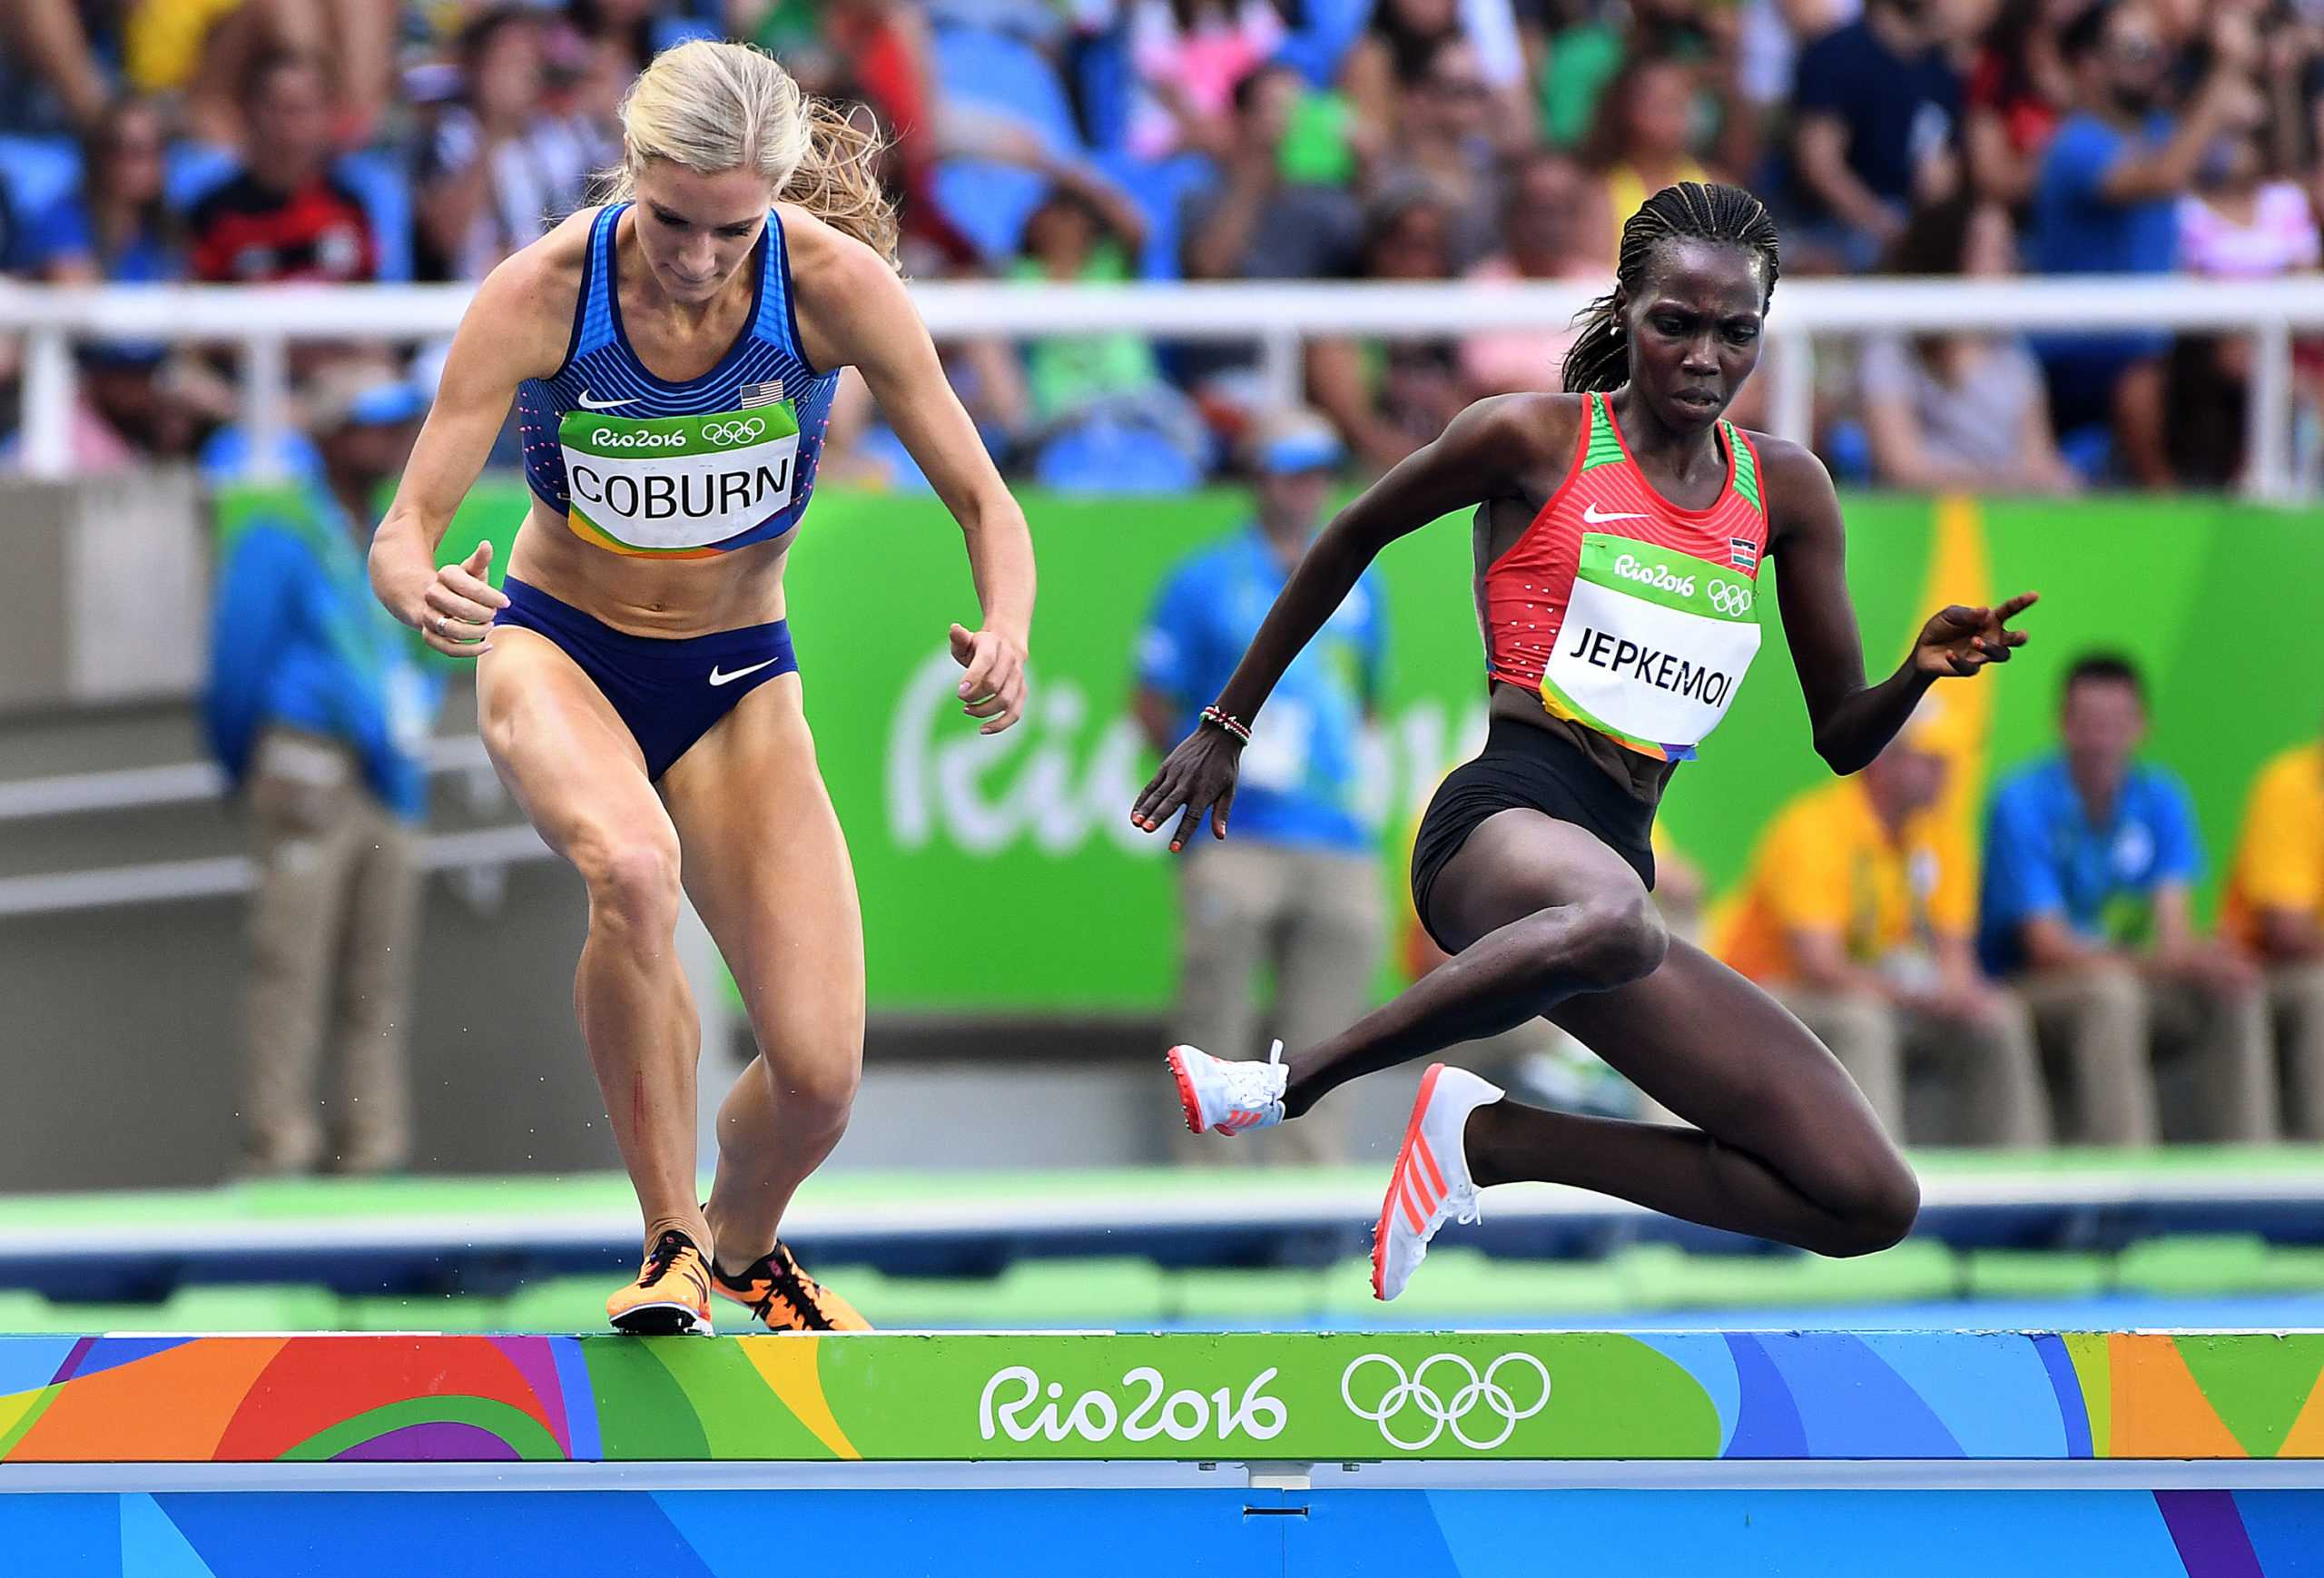 Emma Coburn, left, of the U.S. battles Kenyas Hyvin Kiyeng Jepkemoi for the silver and bronze medal on the last lap of the 3,000-meter steeplechase on Monday, Aug. 15, 2016 at the Rio 2016 Olympics in Brazil. (Wally Skalij/Los Angeles Times/TNS)